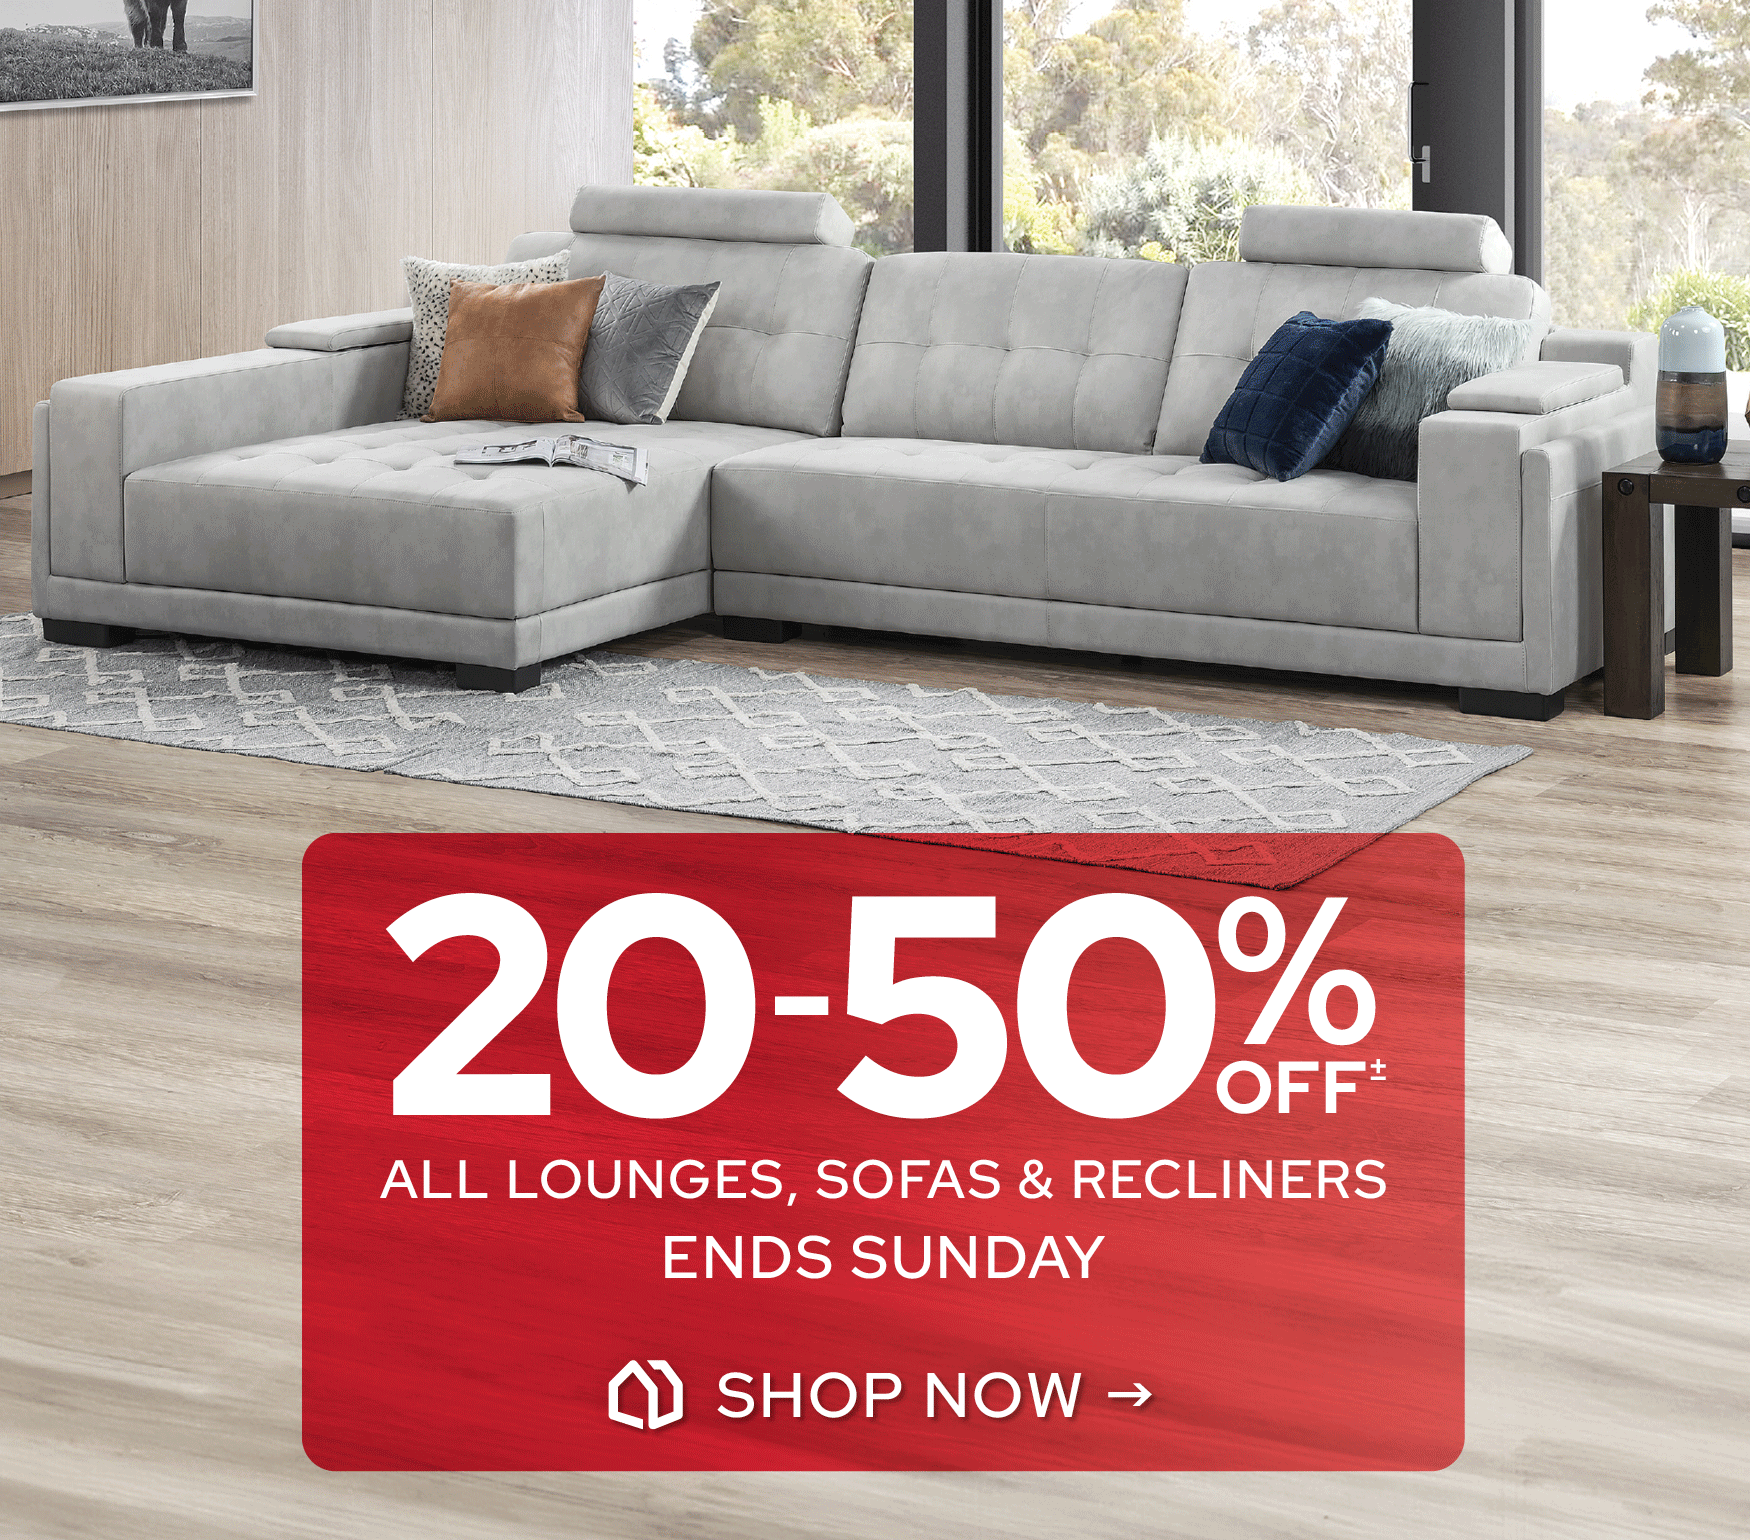 Weekend Lounge Sale - Ends Sunday